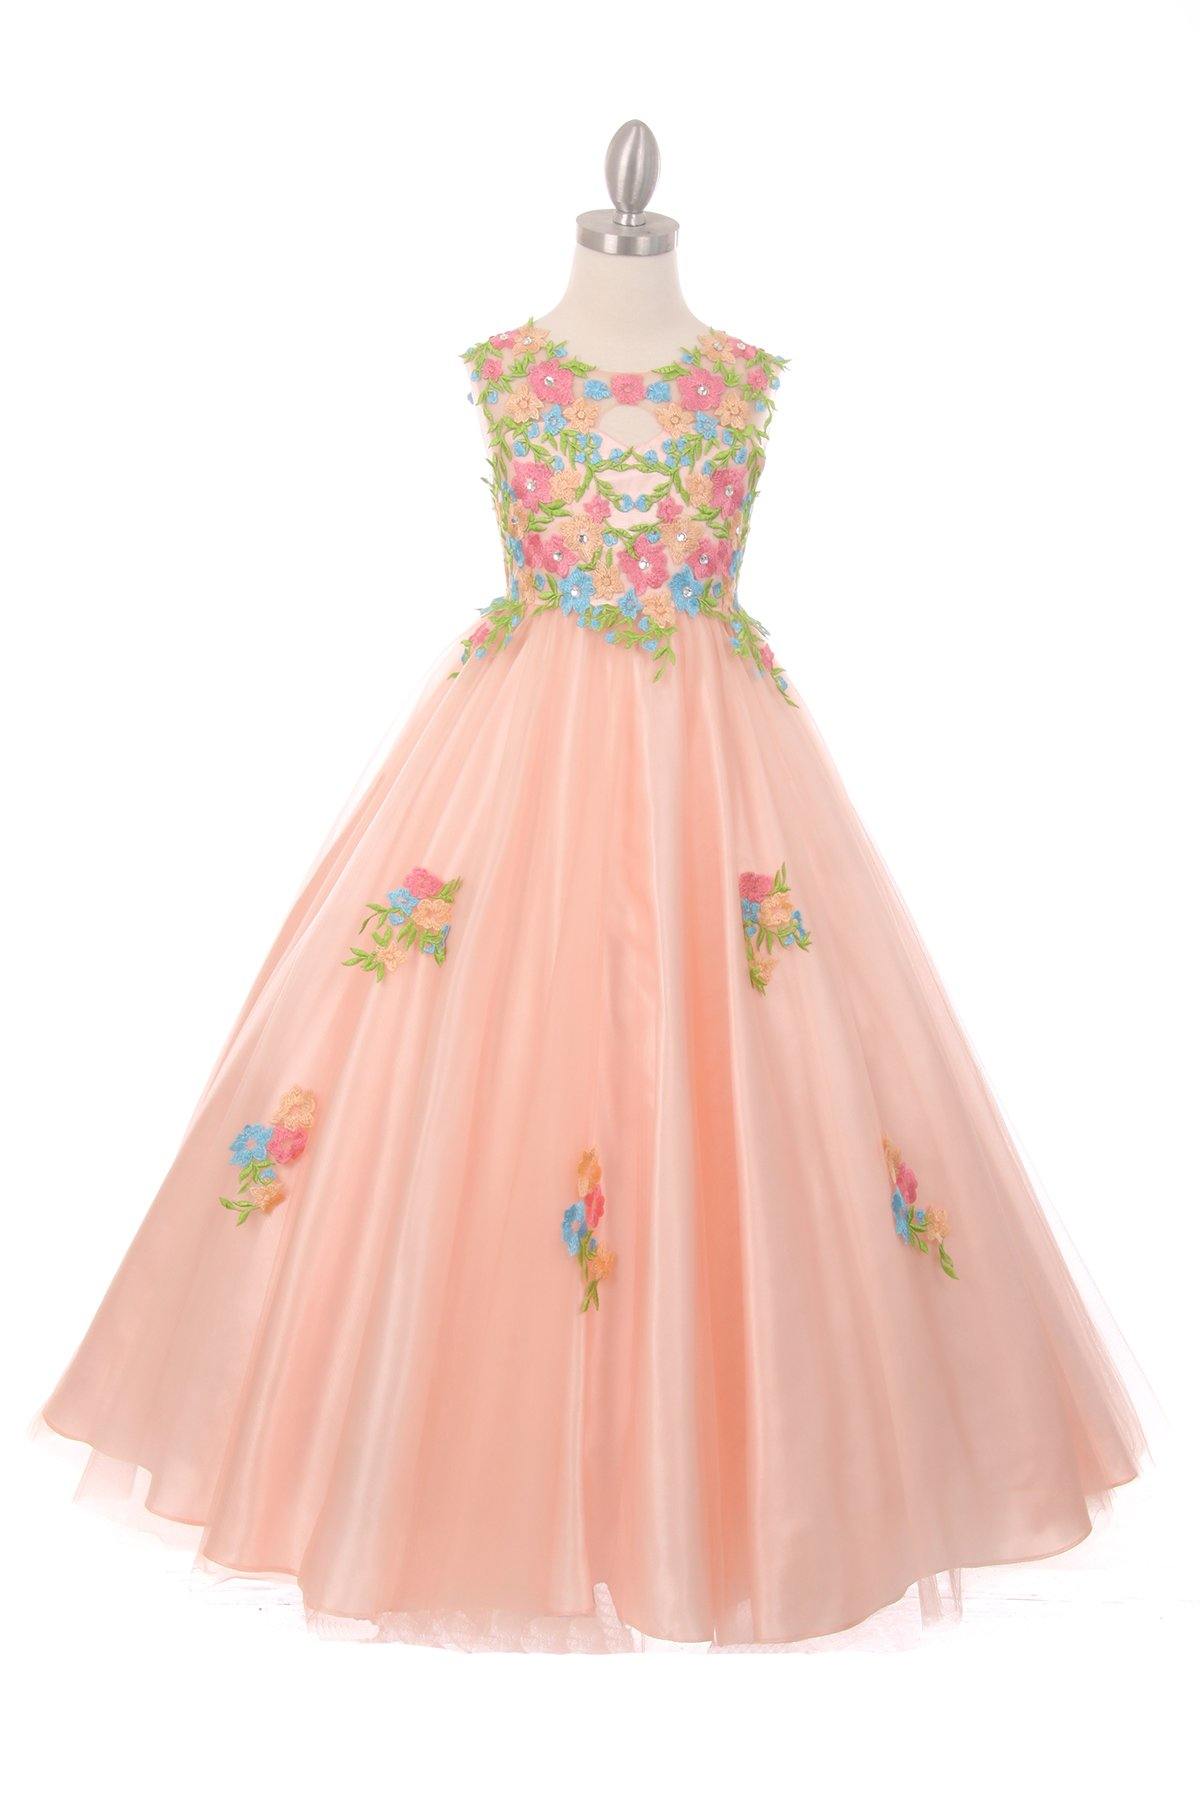 Sleeveless Floral Lace and Tulle Flower Girl Dress - The Dress Outlet Cinderella Couture